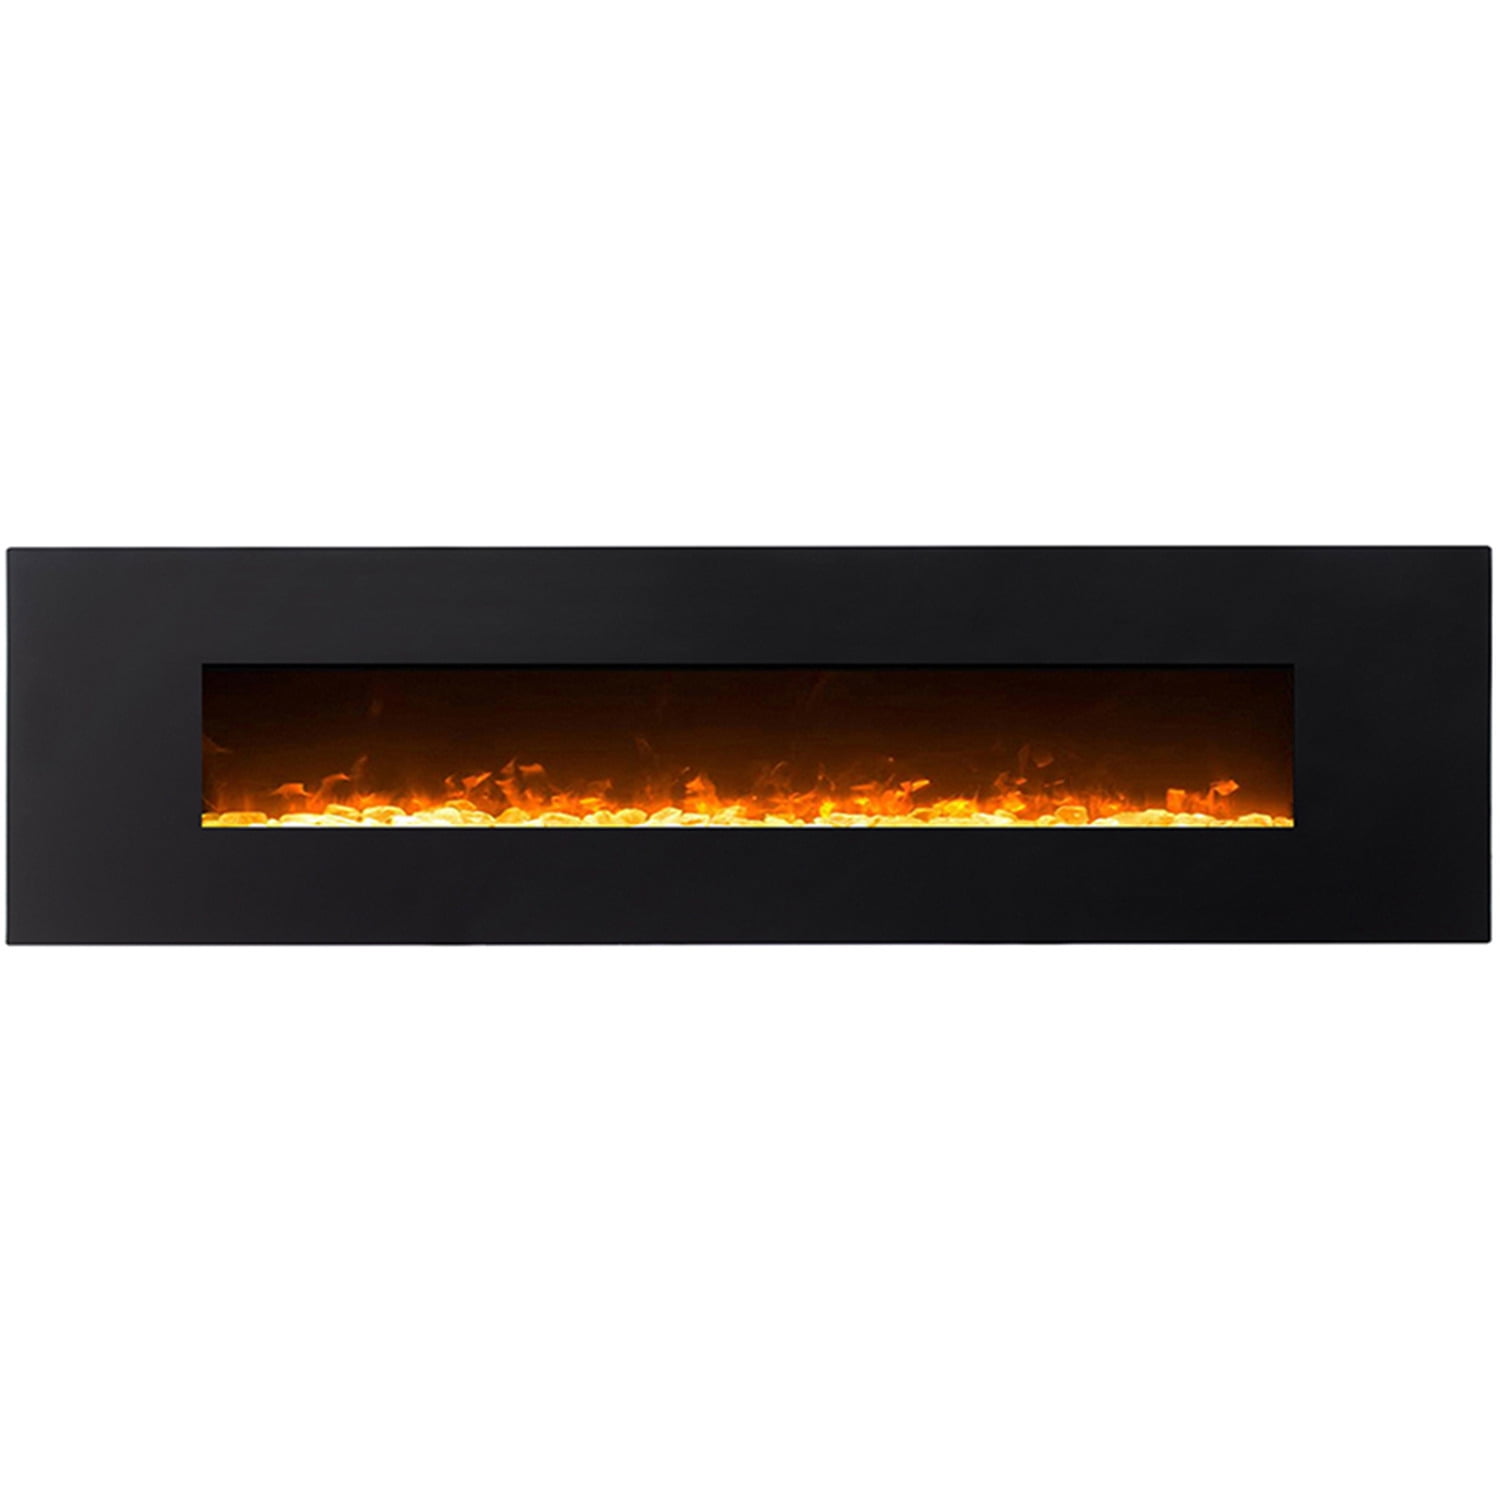 Regal Flame Huron Black 95 Crystal Ventless Heater Electric Wall Mounted Fireplace Better than Wood Fireplaces, Gas Logs, Firep